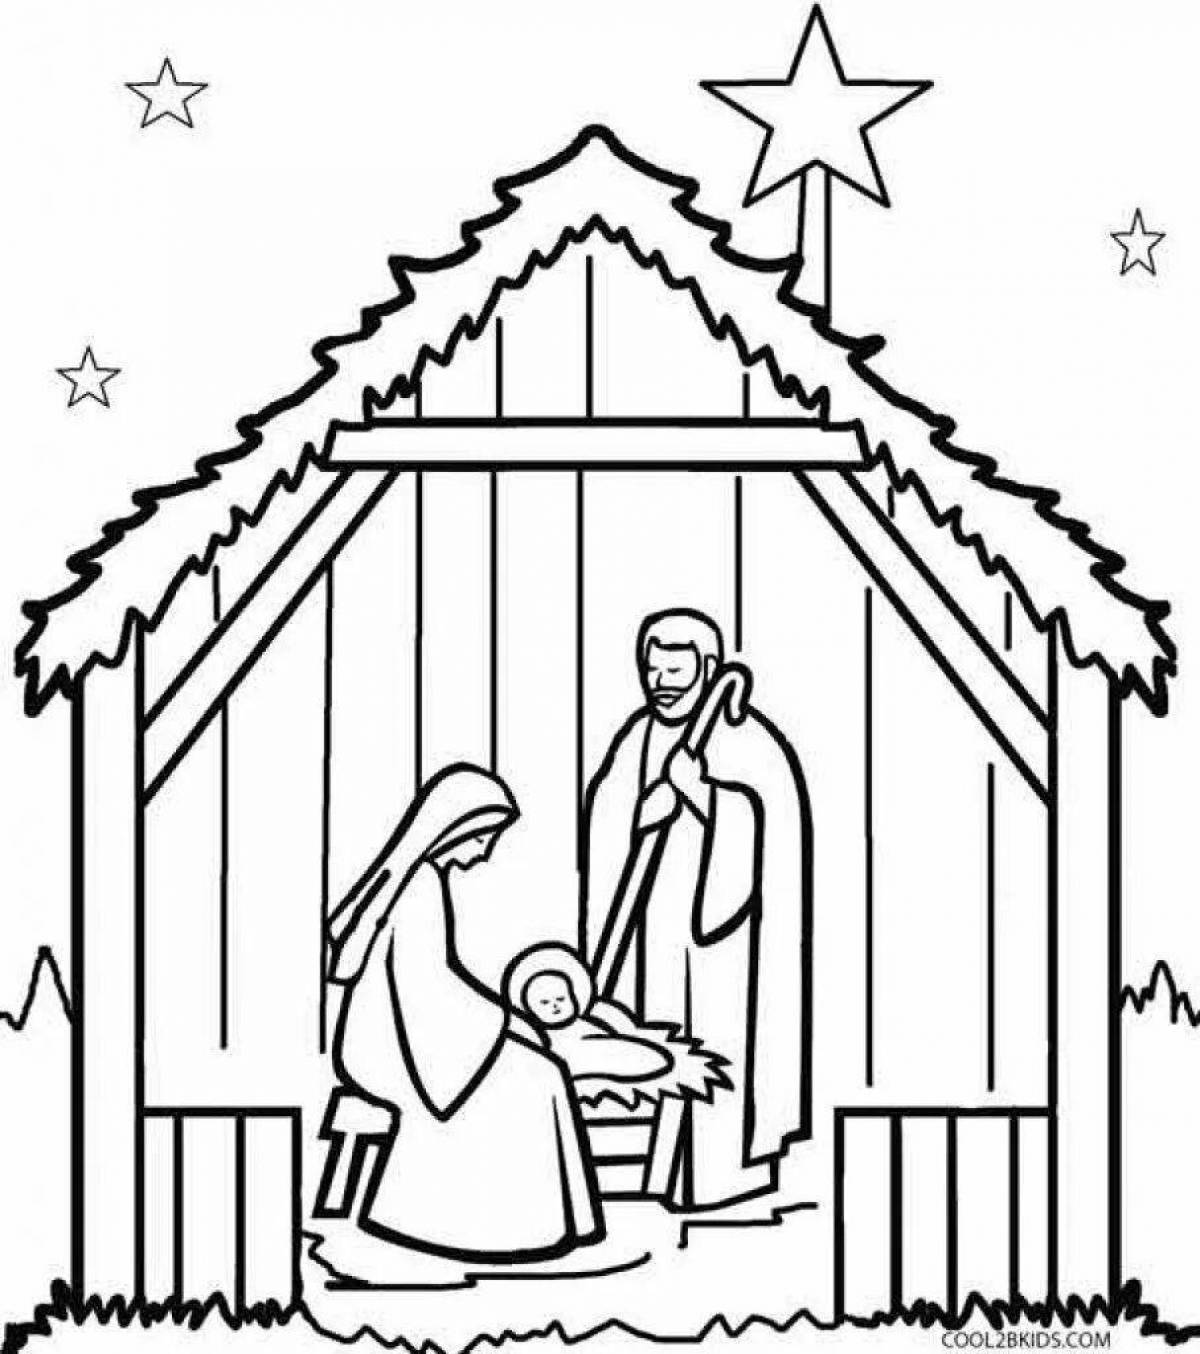 Coloring page rich jesus in the manger